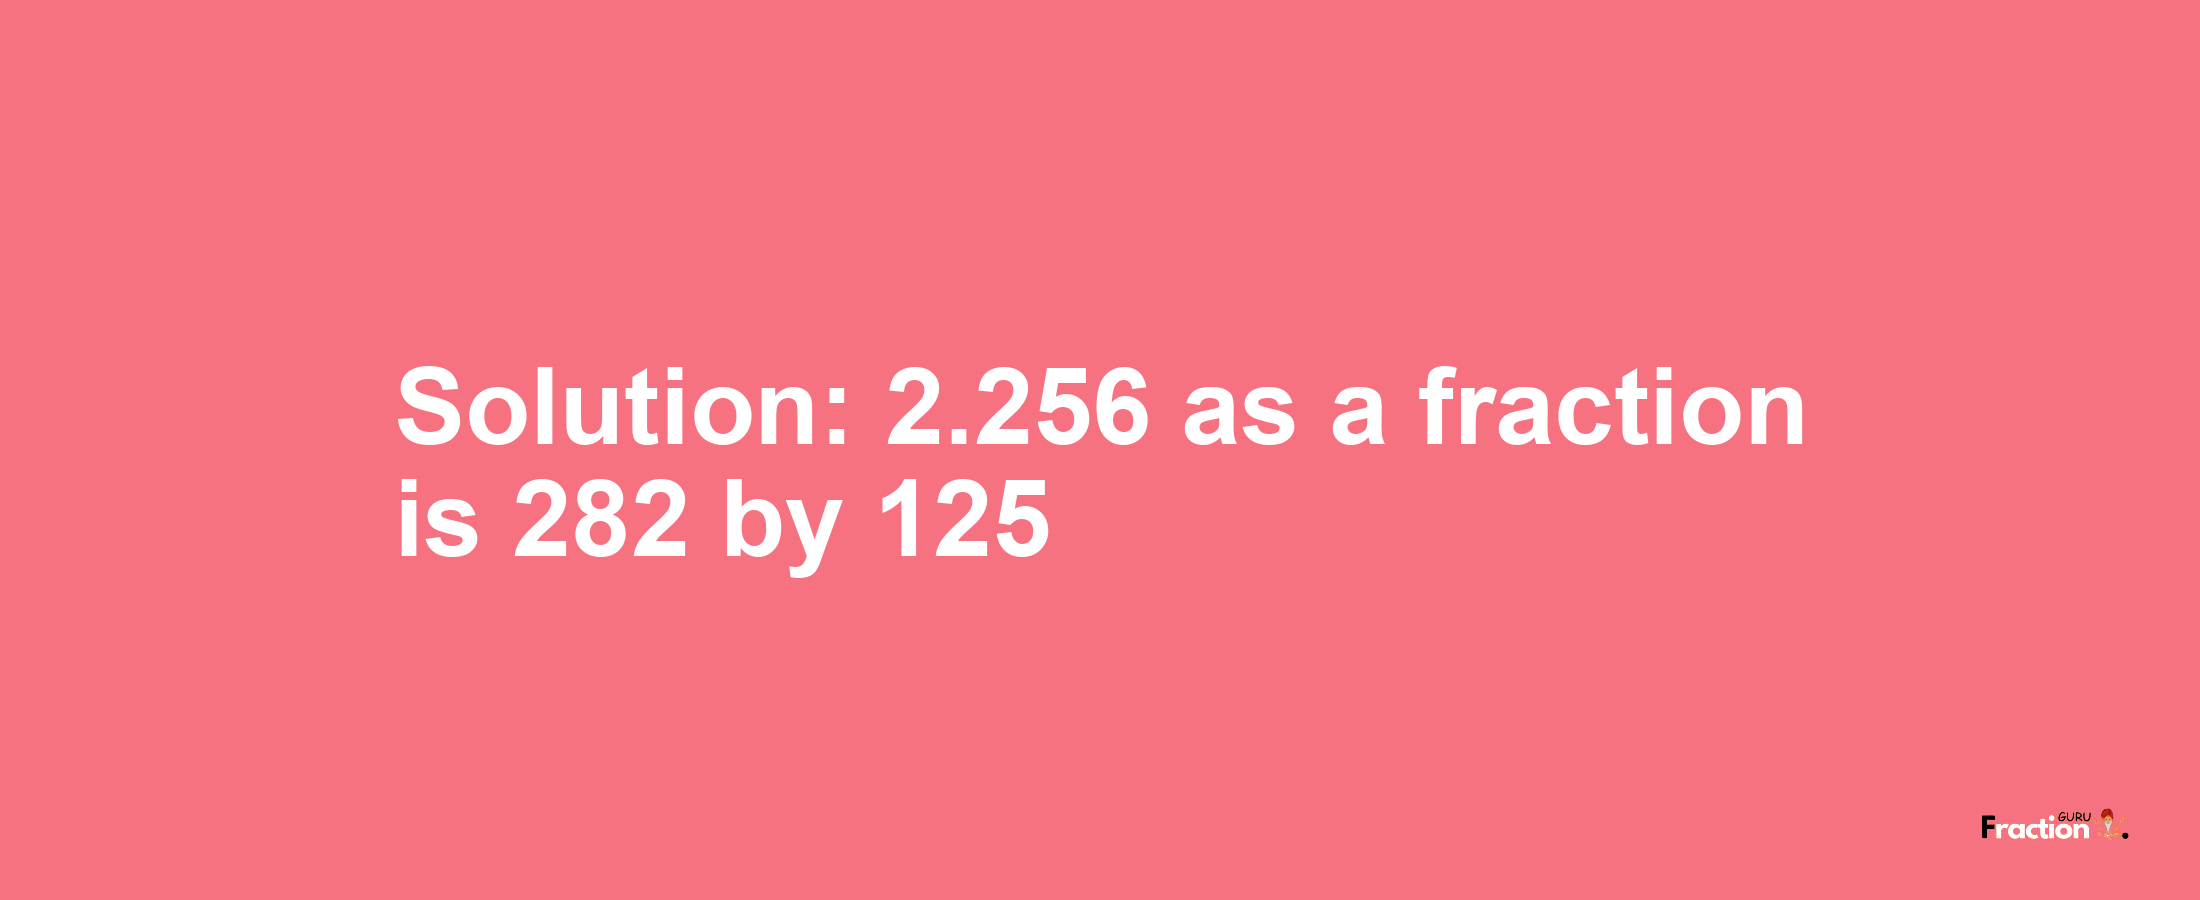 Solution:2.256 as a fraction is 282/125